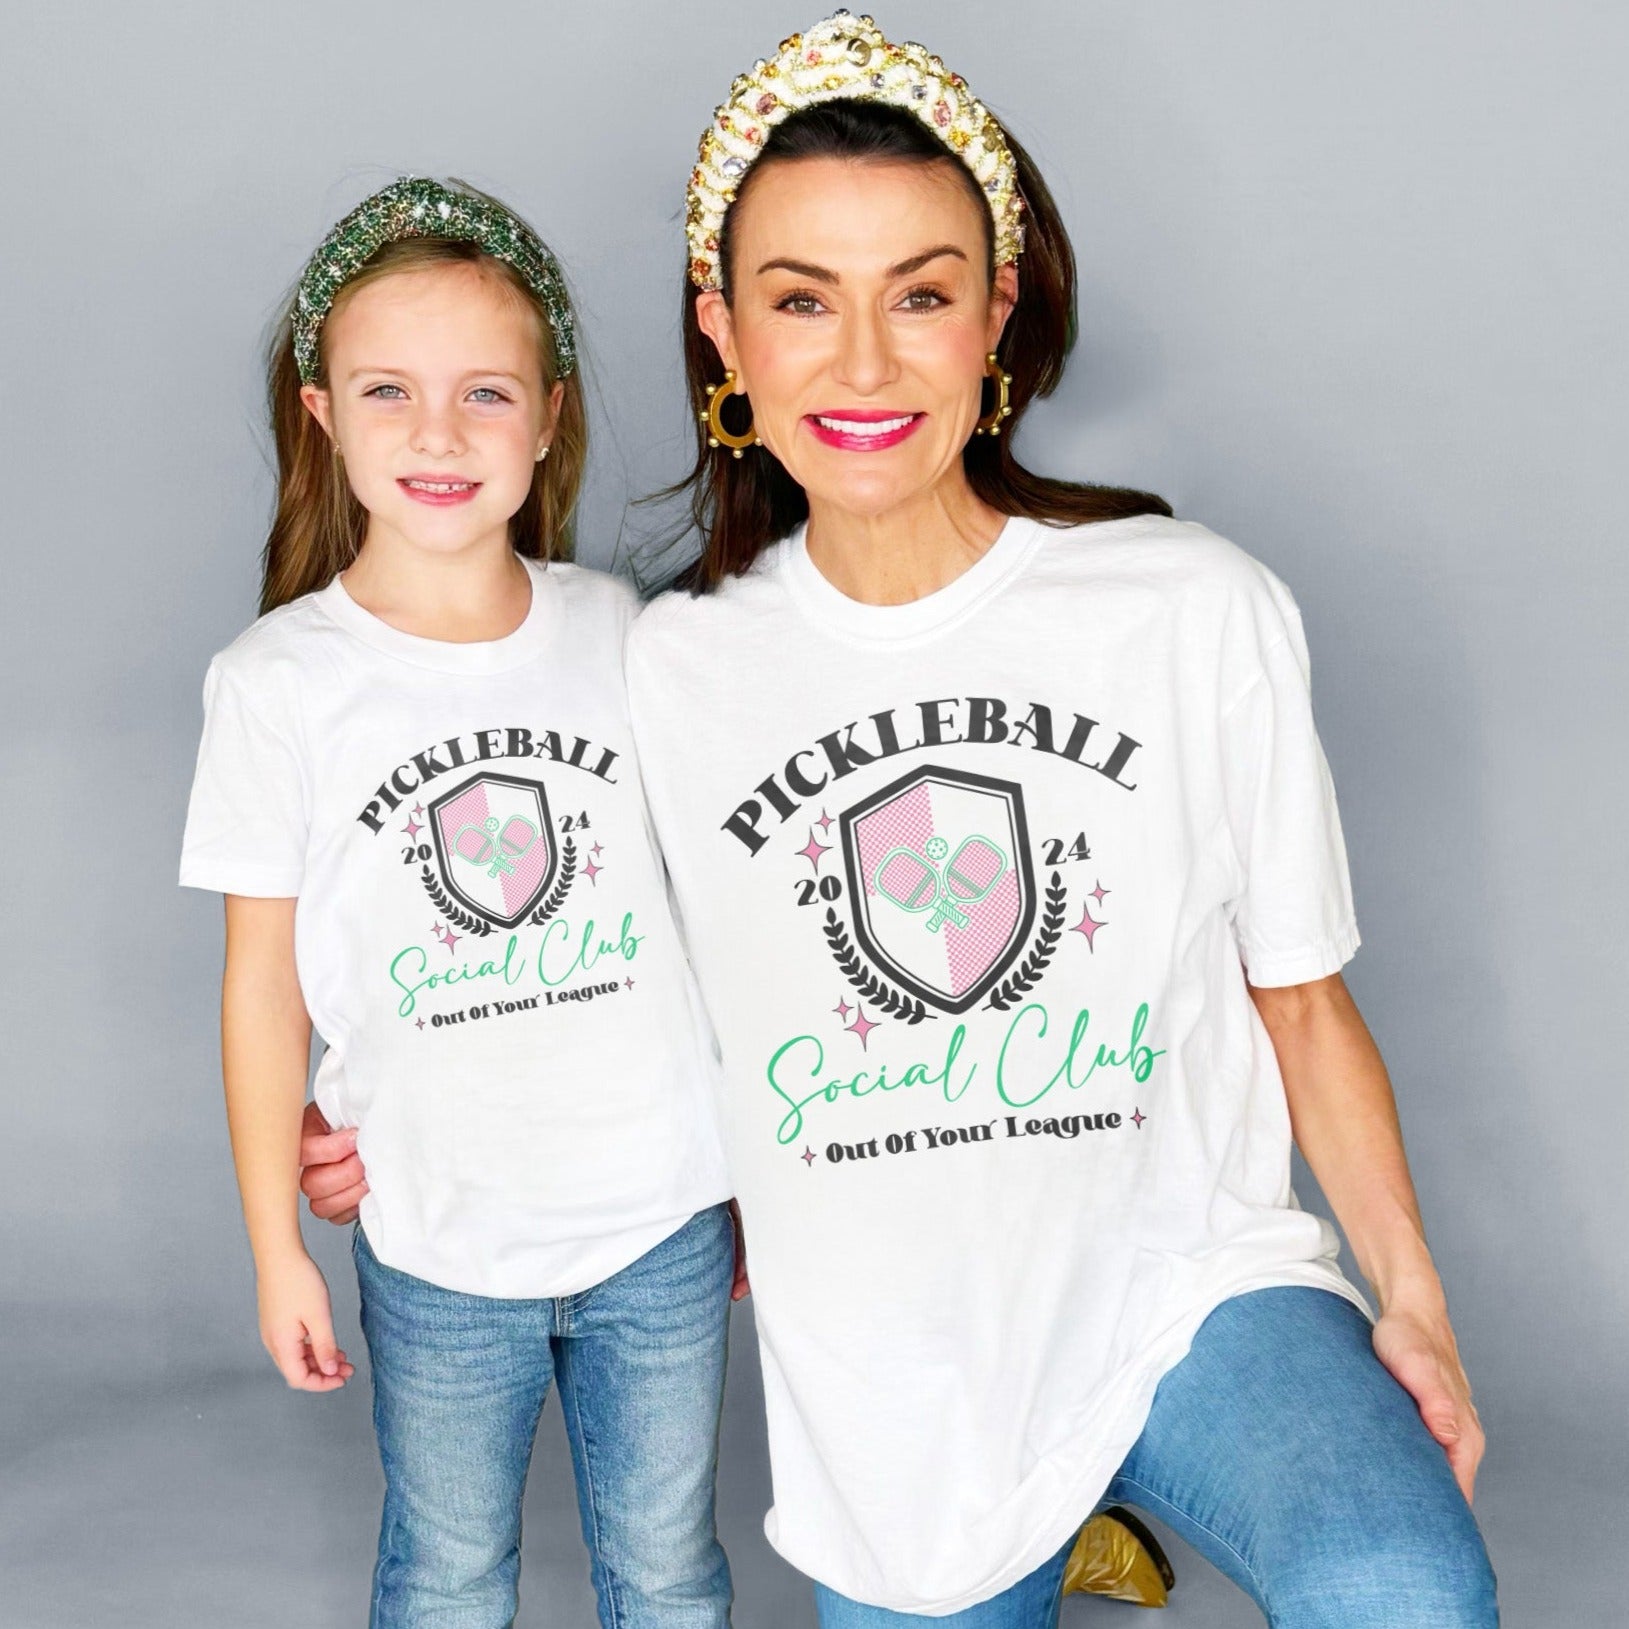 Pickleball Social Club Youth and Adult Tee